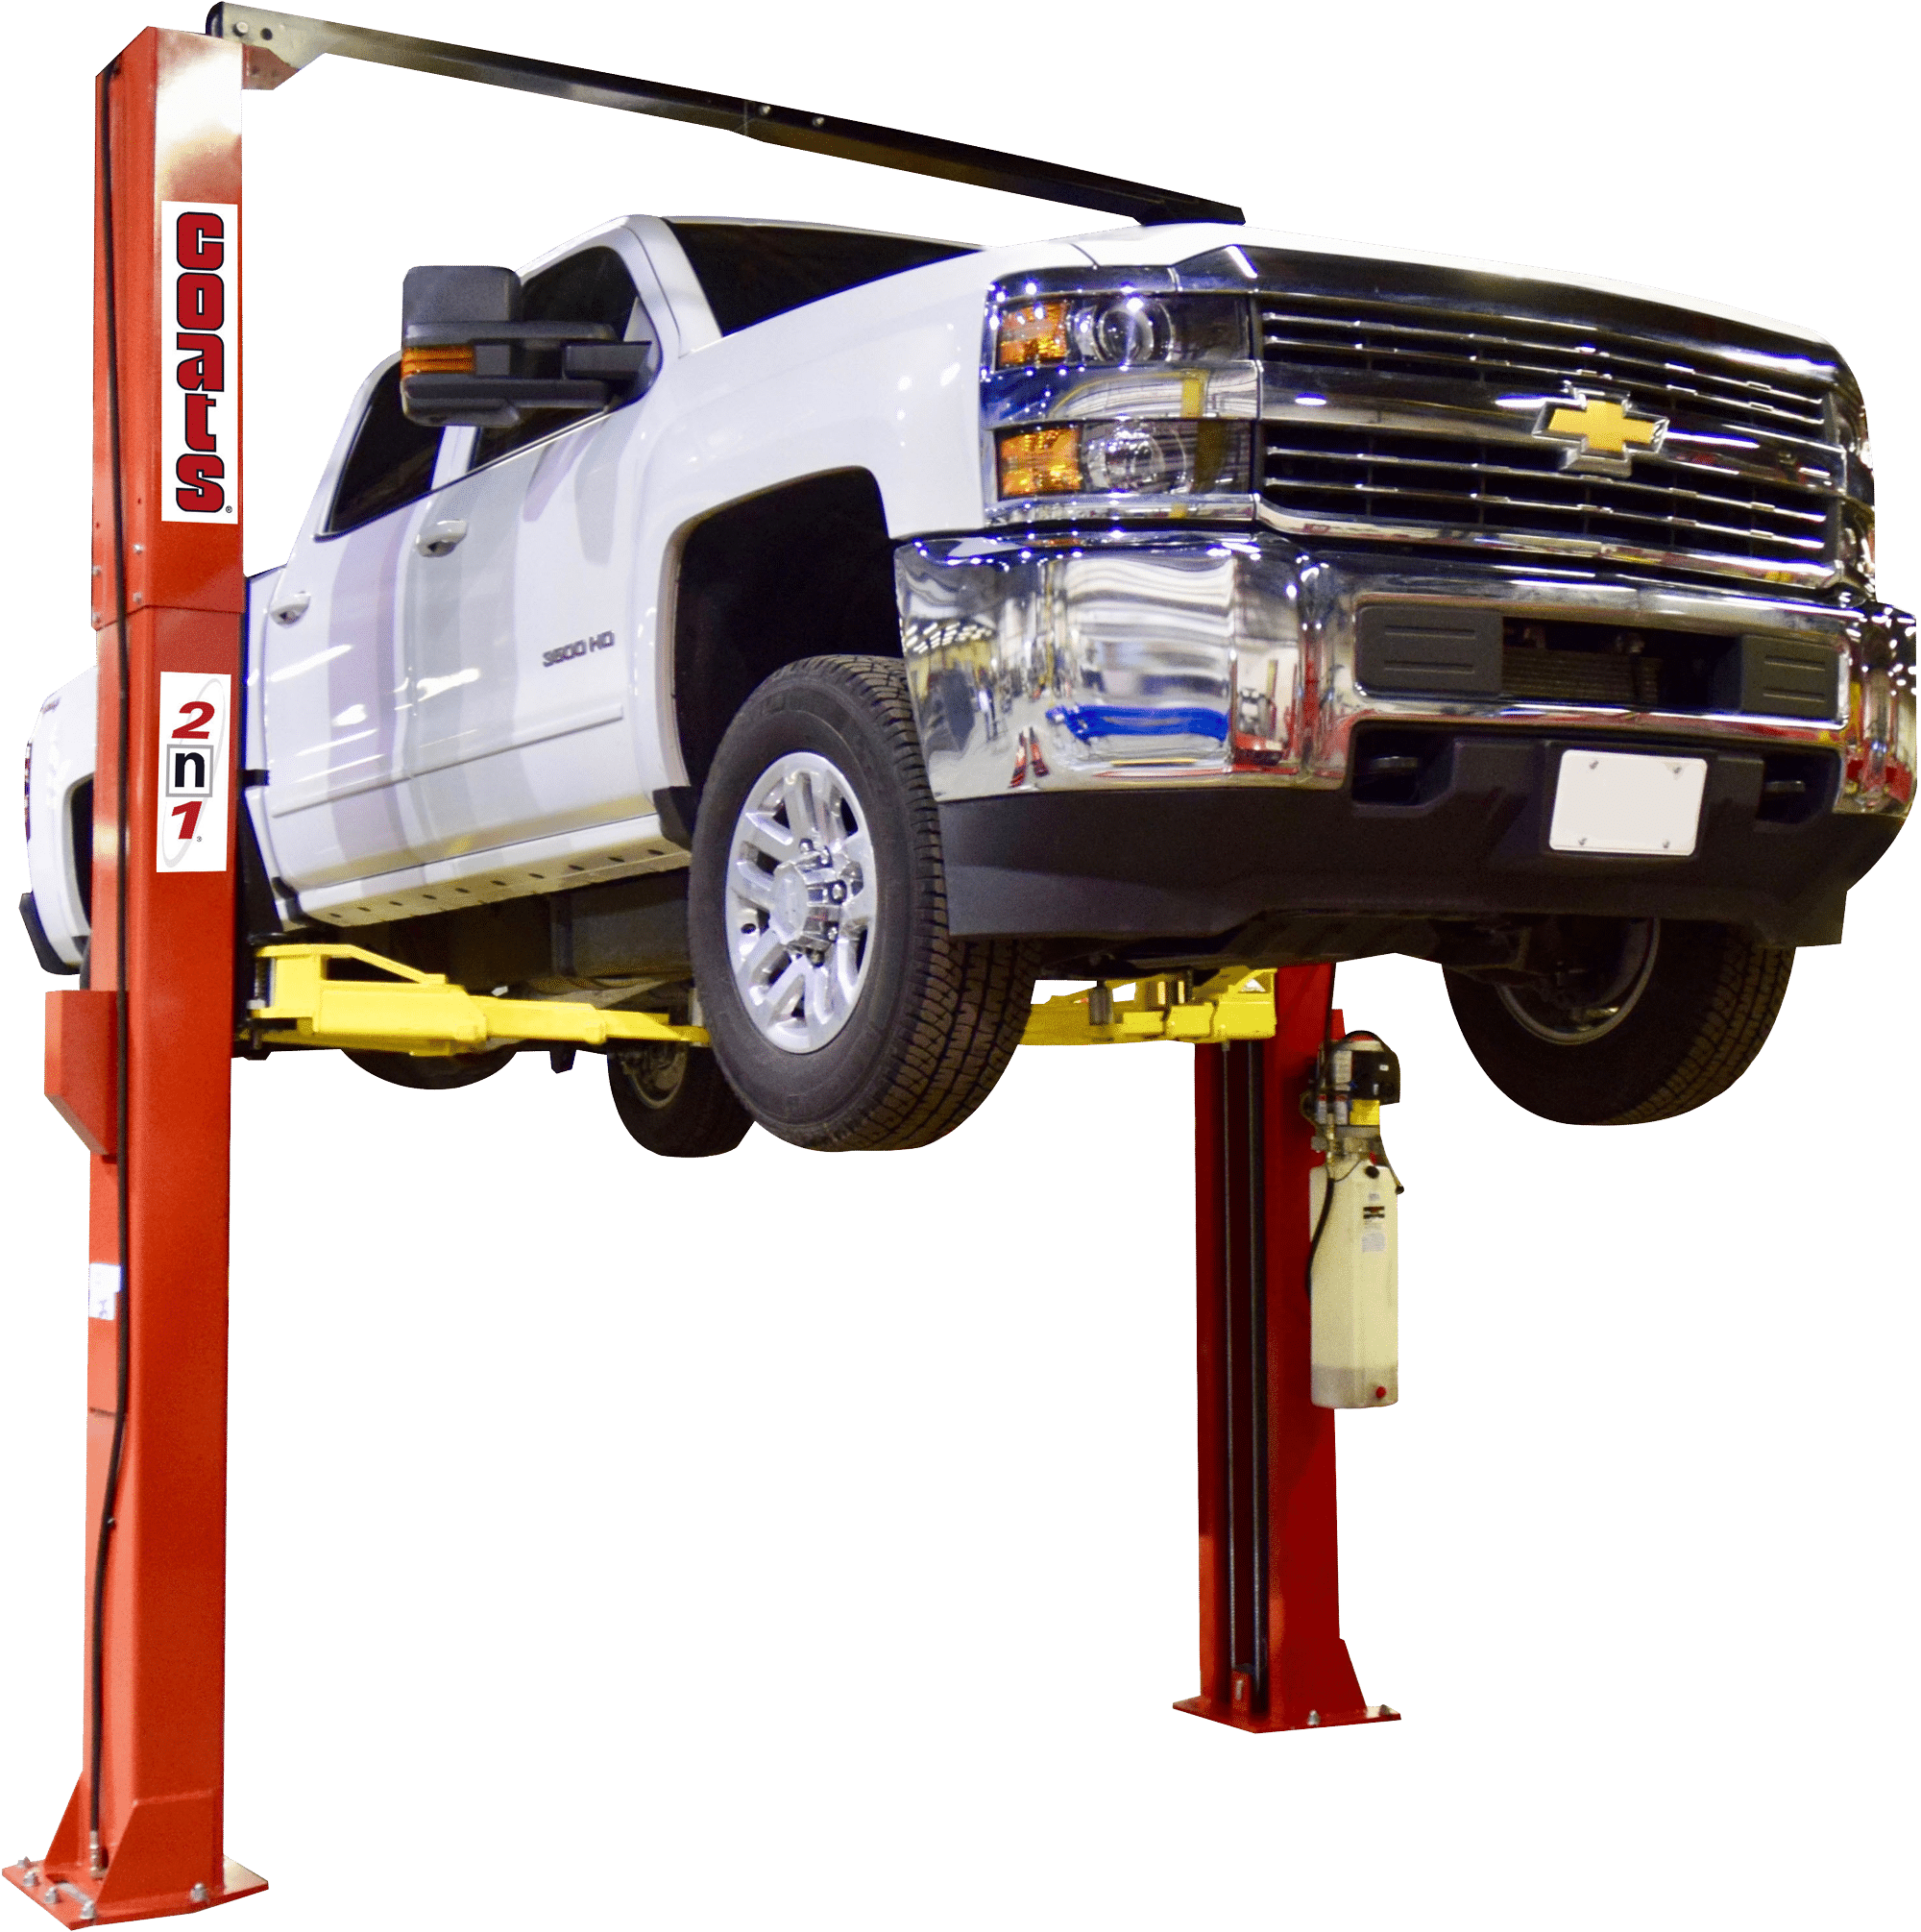 A white chevy truck is lifted on a Coats two post lift